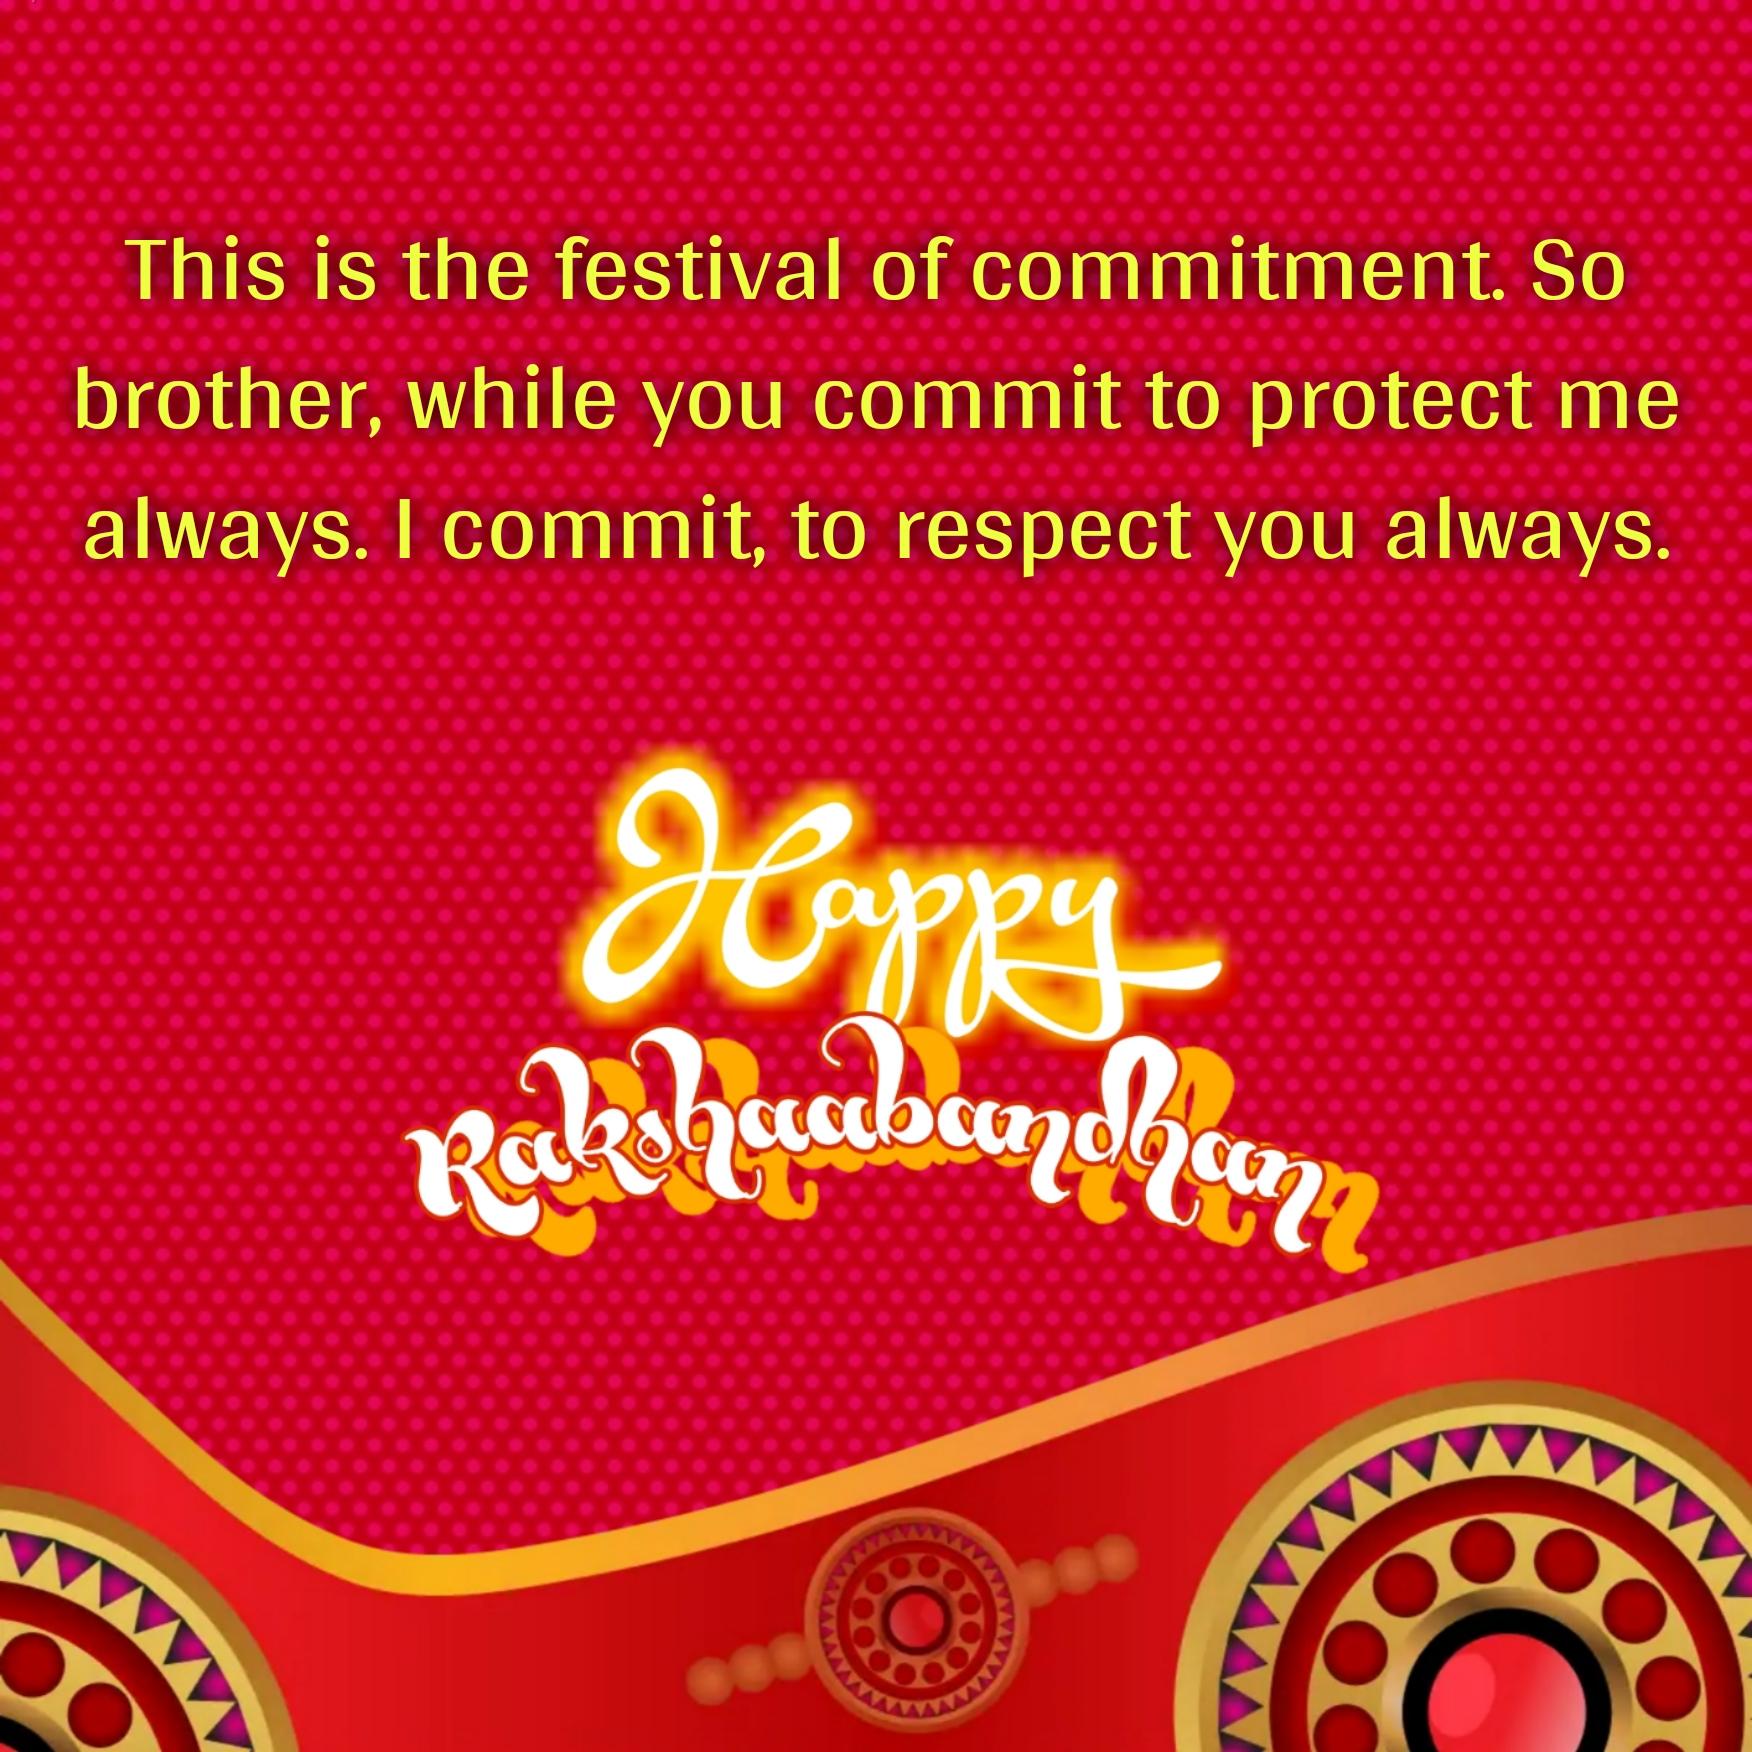 This is the festival of commitment So brother while you commit